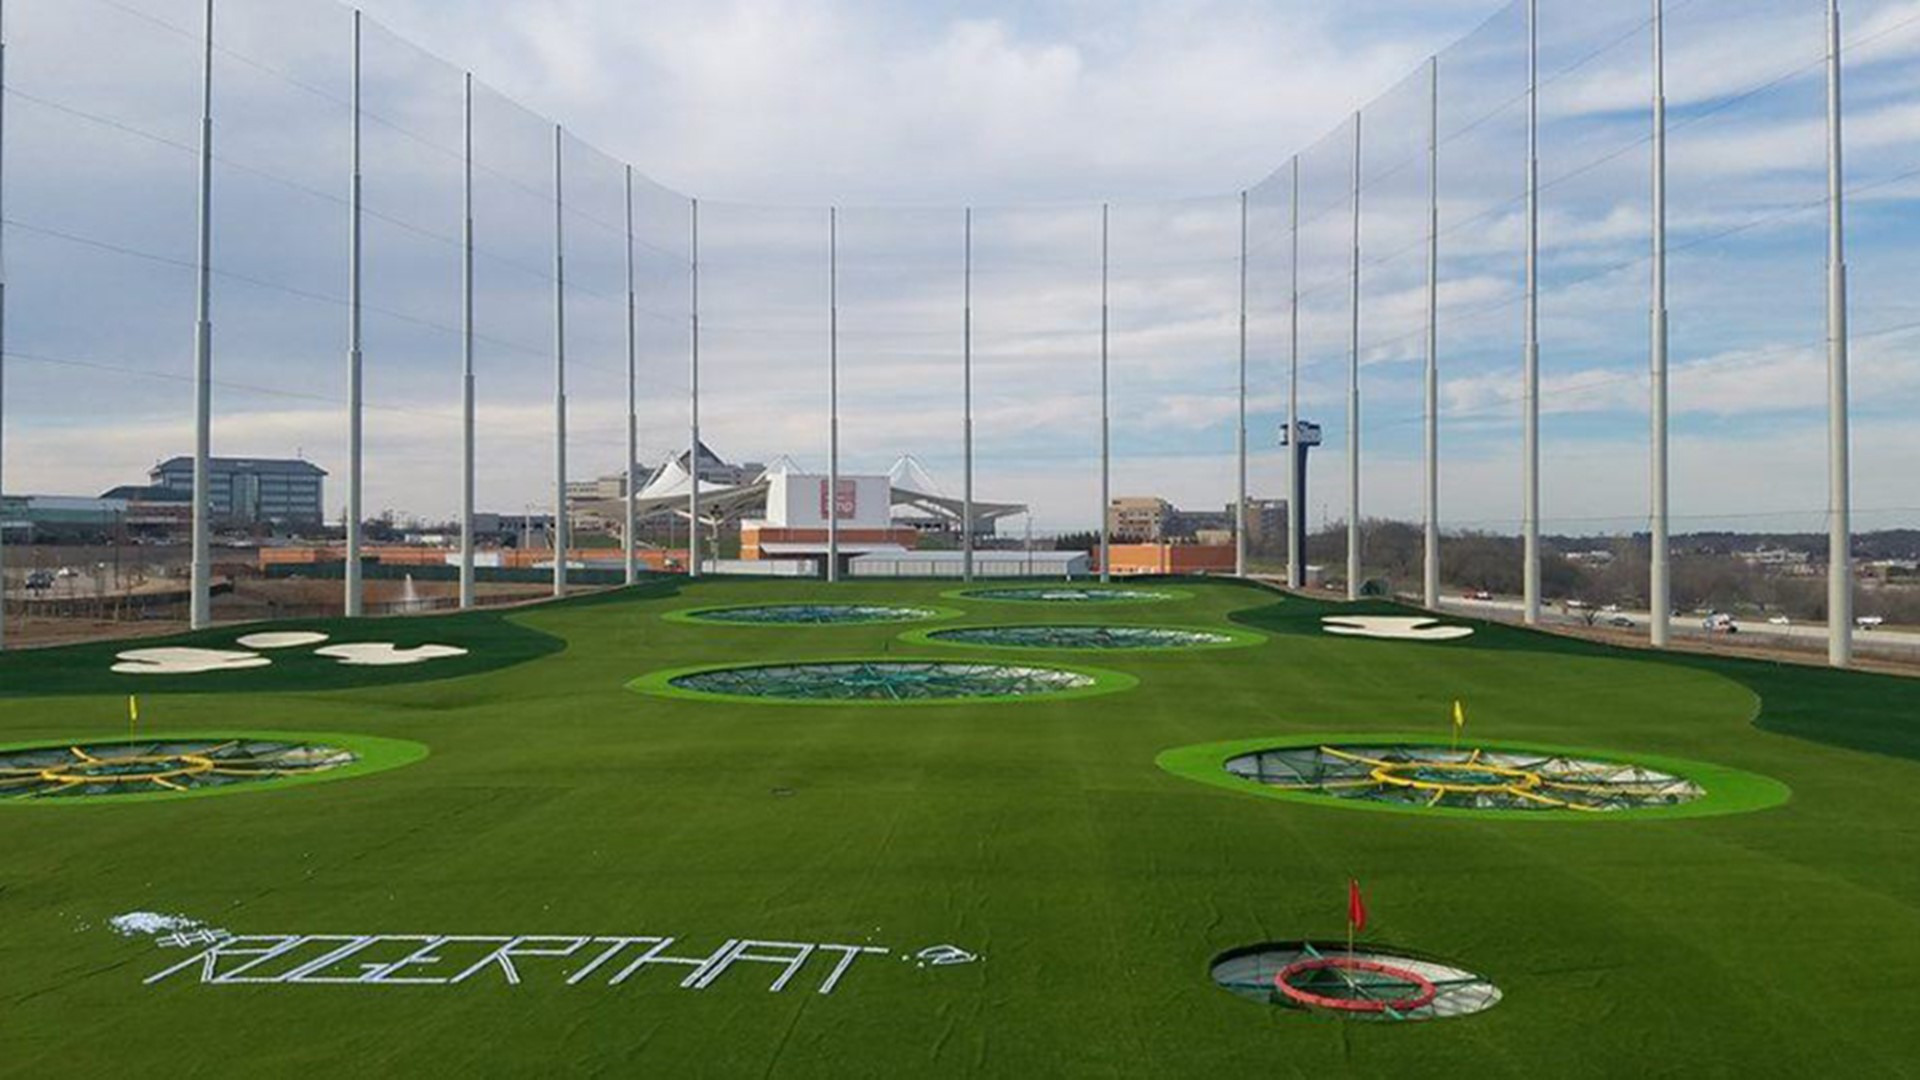 It's an exciting time in Rogers as the long wait for Top Golf to open comes to an end.